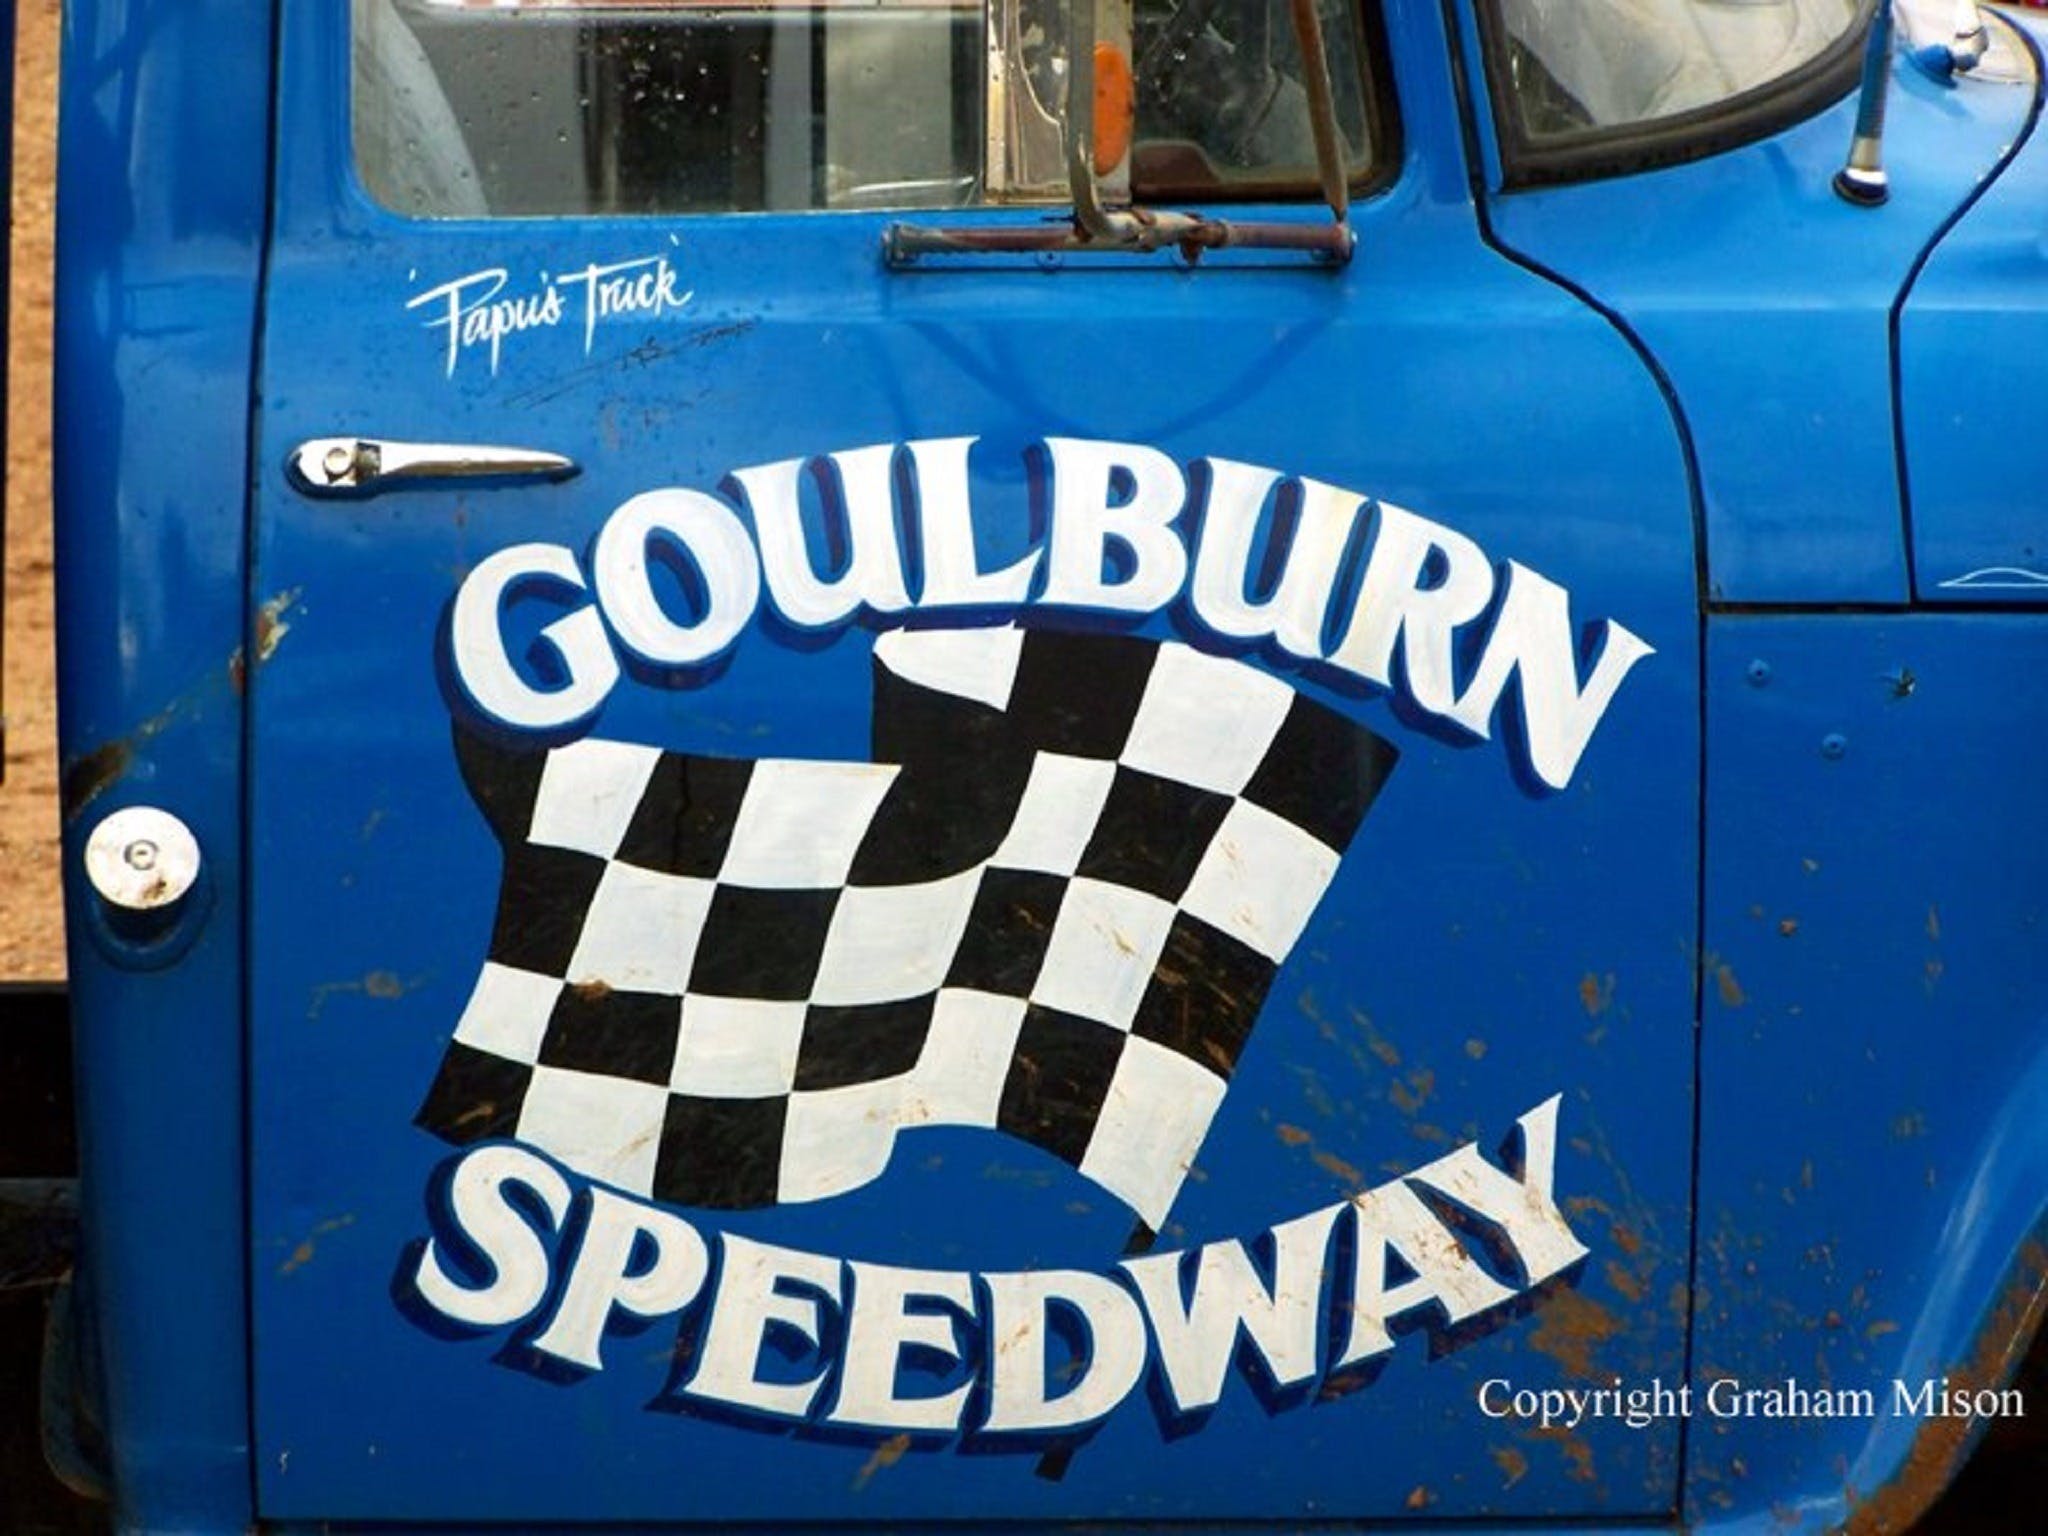 50 years of racing at Goulburn Speedway - Carnarvon Accommodation